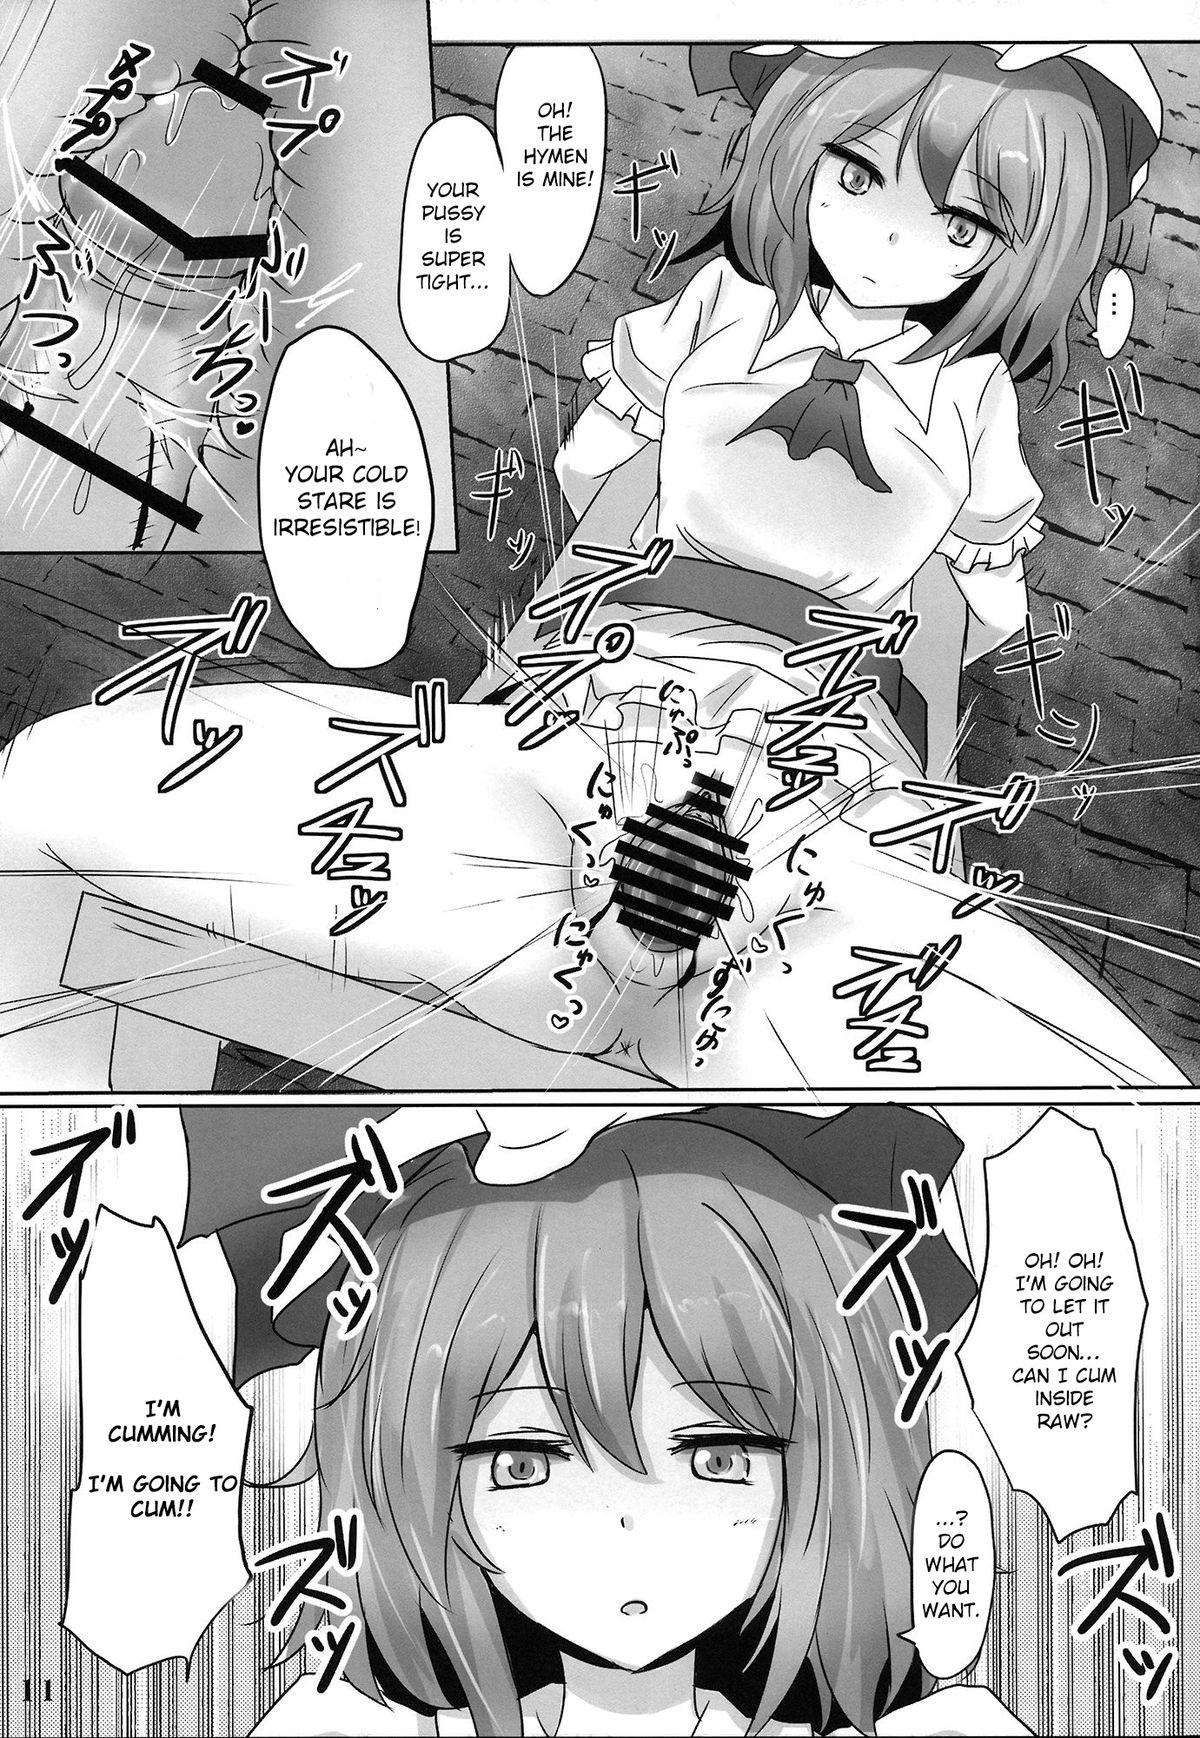 Assfuck Muchi Shichu Assort | Assorted Situations of Ignorance - Touhou project Wanking - Page 10